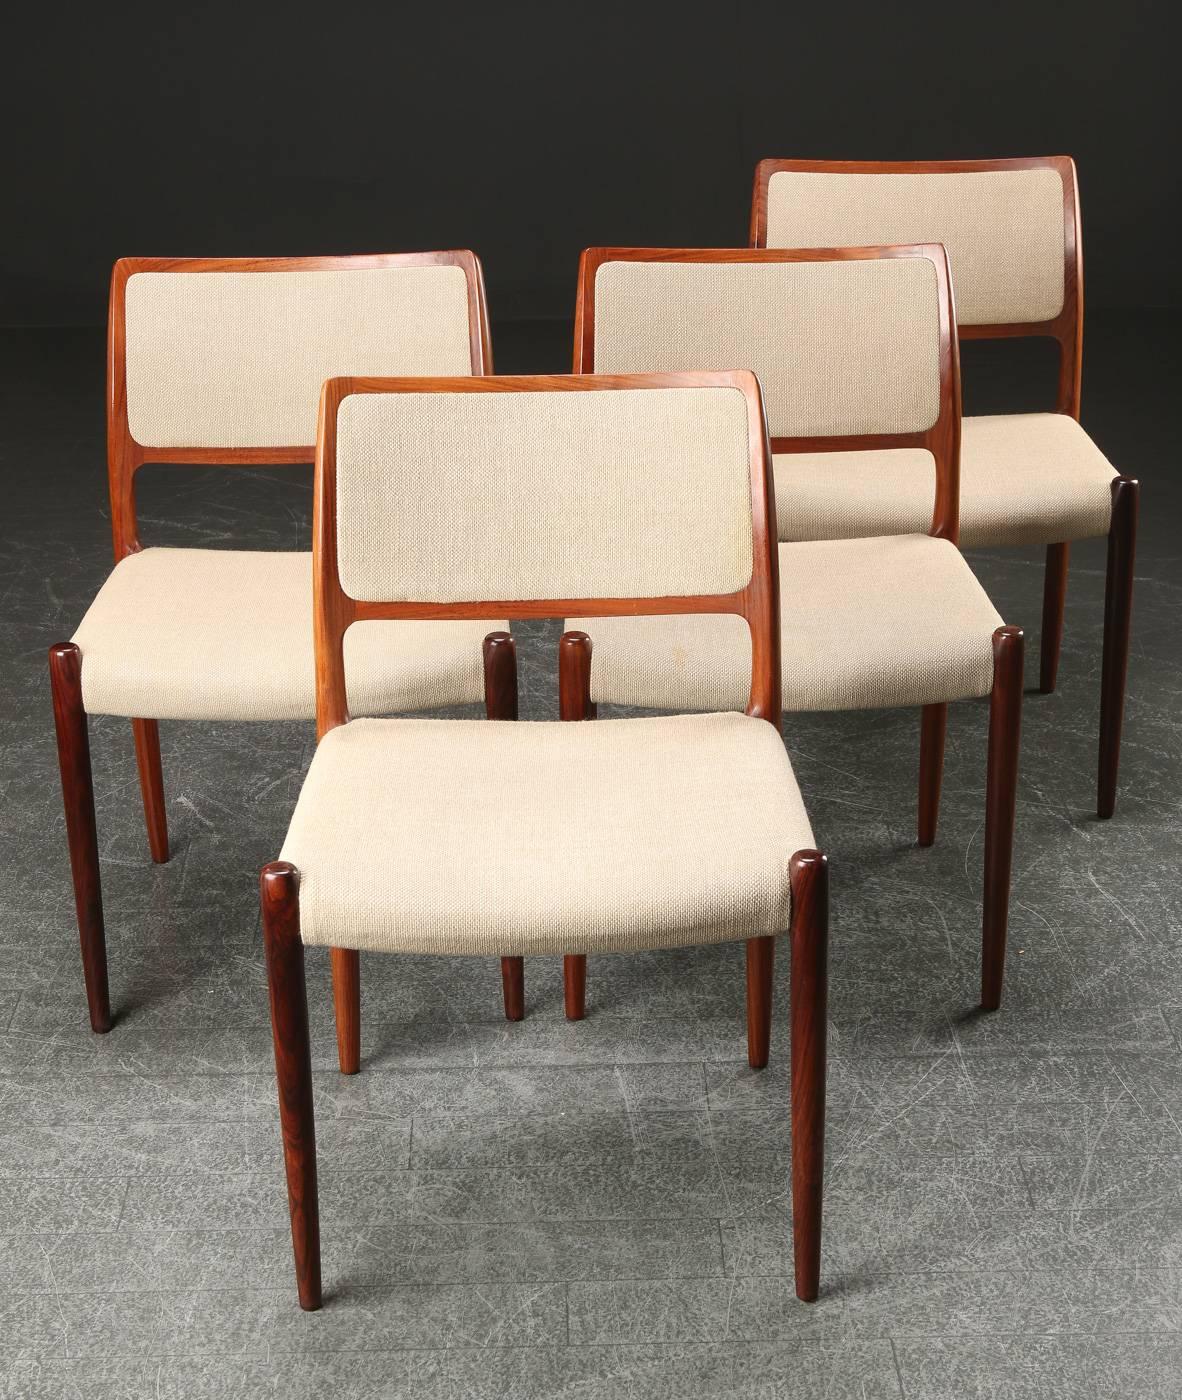 This set of four model 80 dining chairs in rosewood and beige fabric with Niels Otto Møllers characteristic organic shapes and the high standard of craftmanship from J.L. Møller are in a very good condition with minor wear consistent with age and